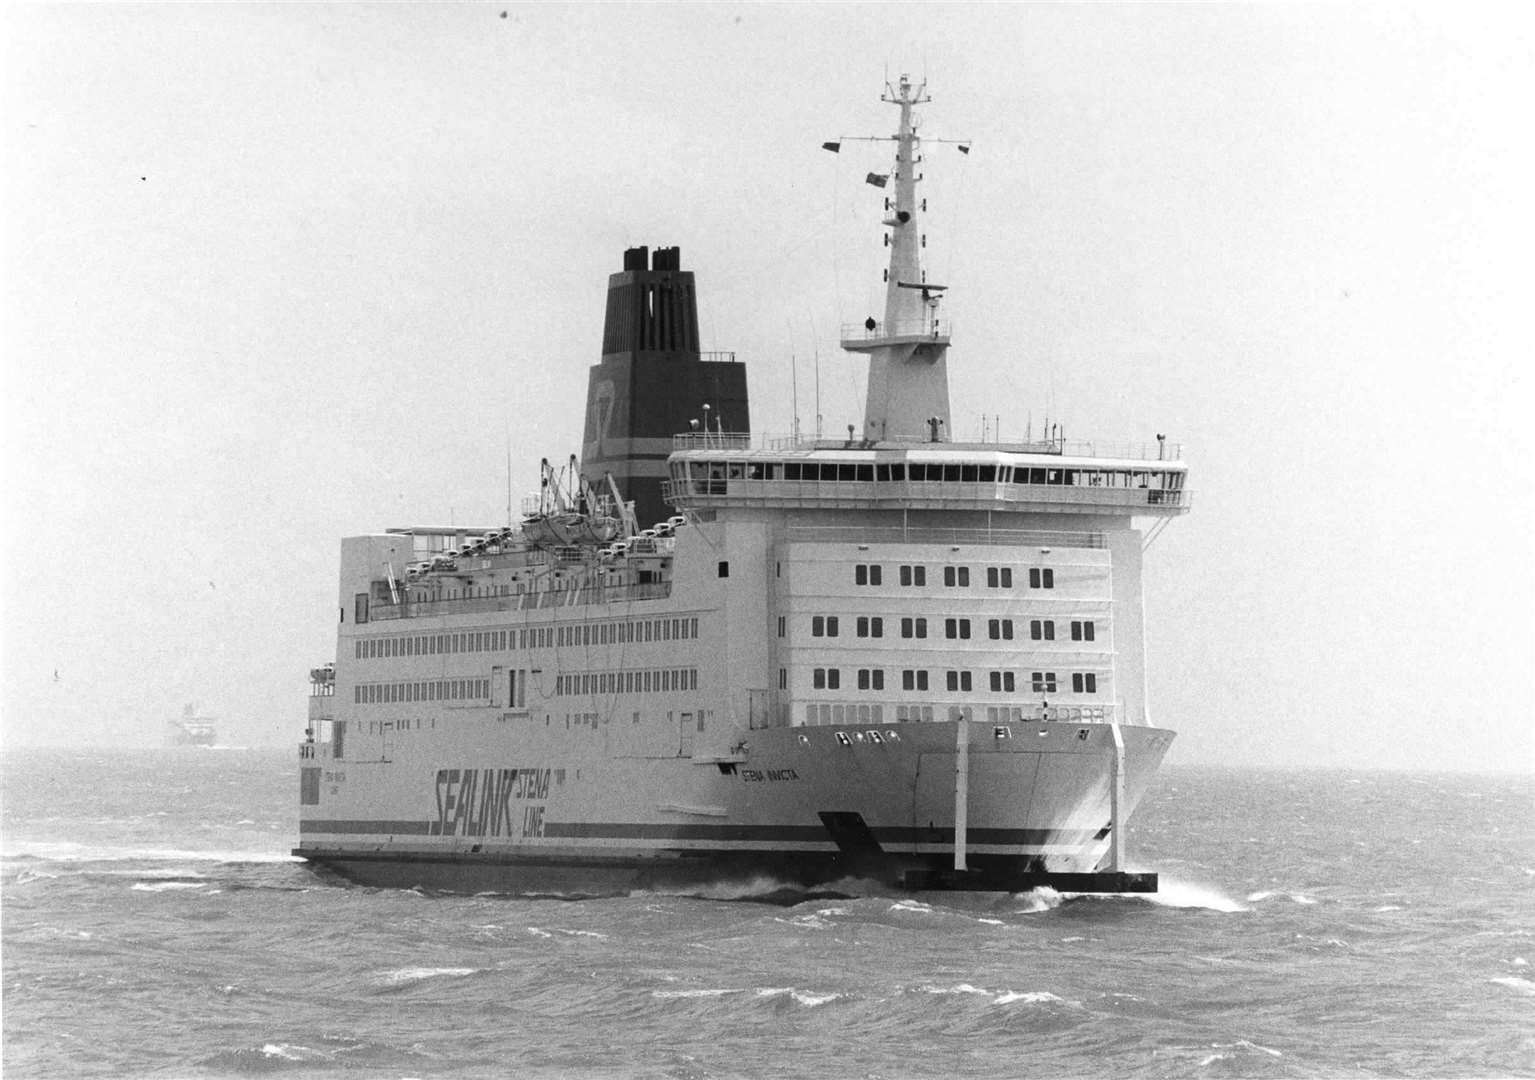 Remember the days when Sealink sailed? Not the Fantasta or Fiesta but once its ships were a common sight crossing the Channel